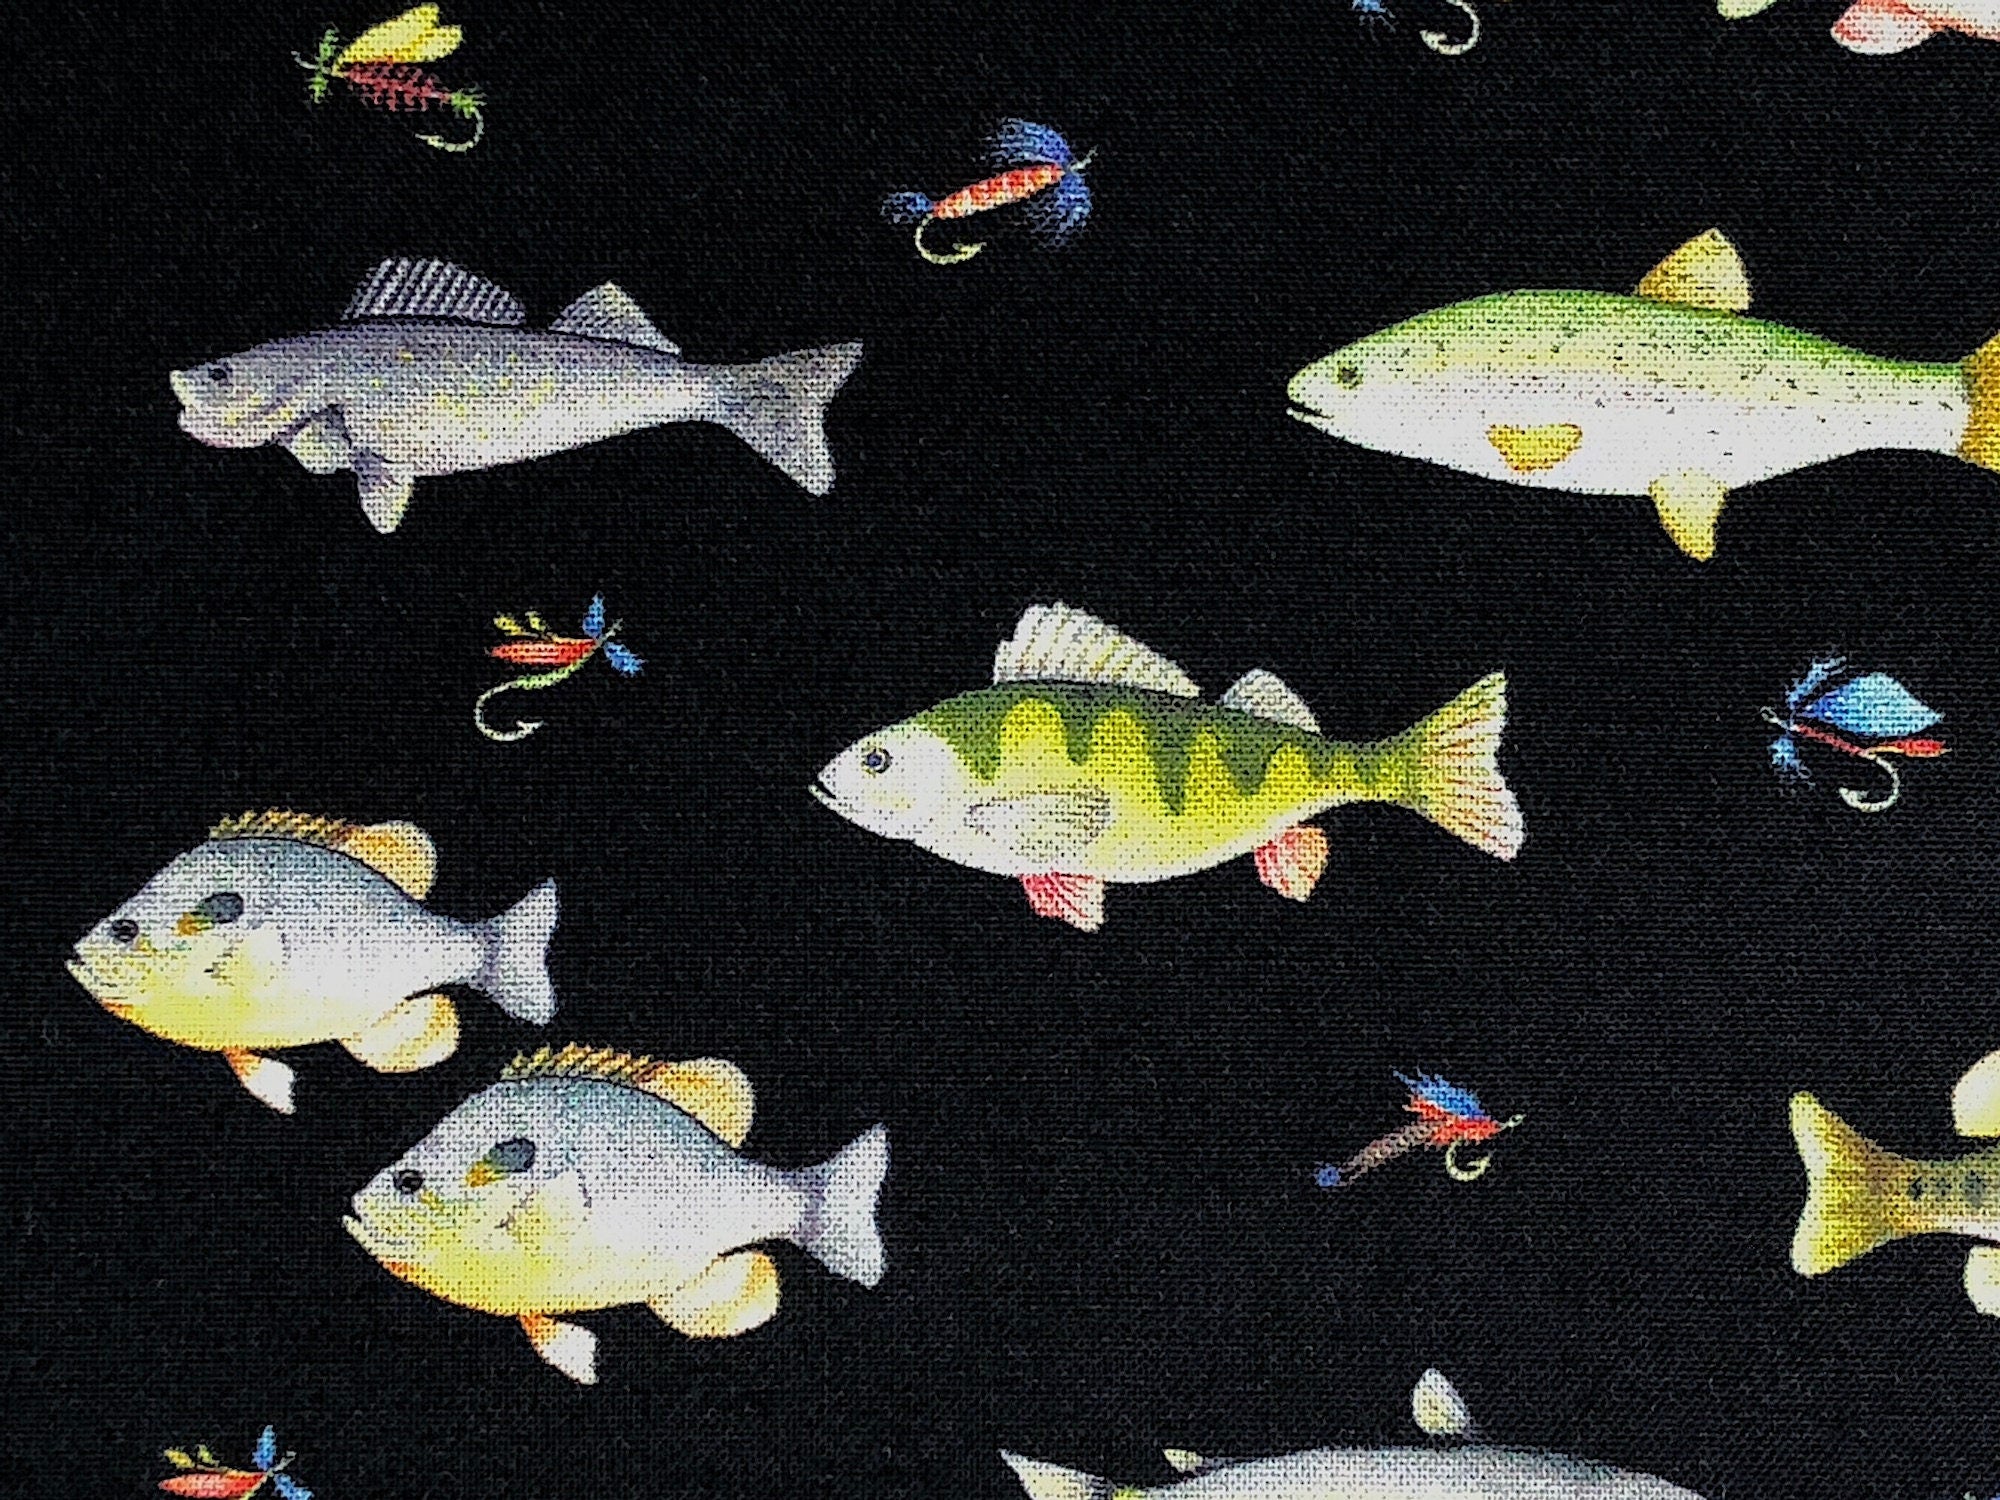 This fabric is called Go Fish Black and is part of the Keep It Reel collection. It is covered with various fish and fishing flies.